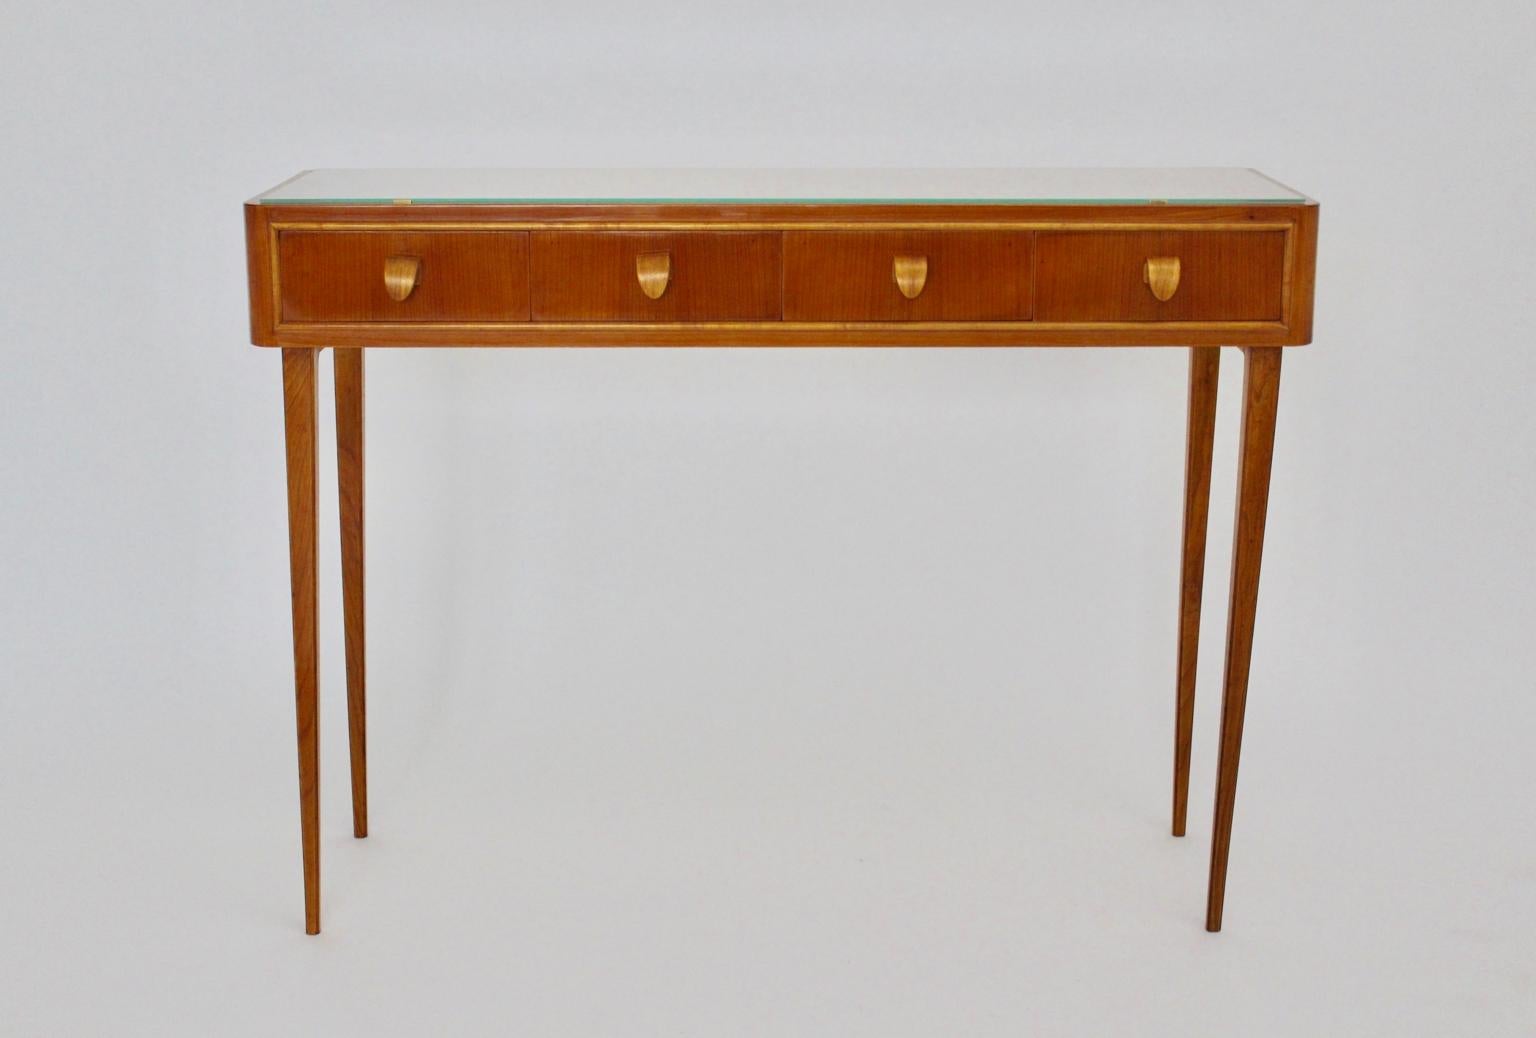 Mid century modern vintage commode or sideboard from cherry wood designed and executed Italy 1950s.
The wonderful sideboard or commode shows solid cherry wood, maple tree veneer, plywood, fibre board and brass details.
Honey brown cherry wooden tone